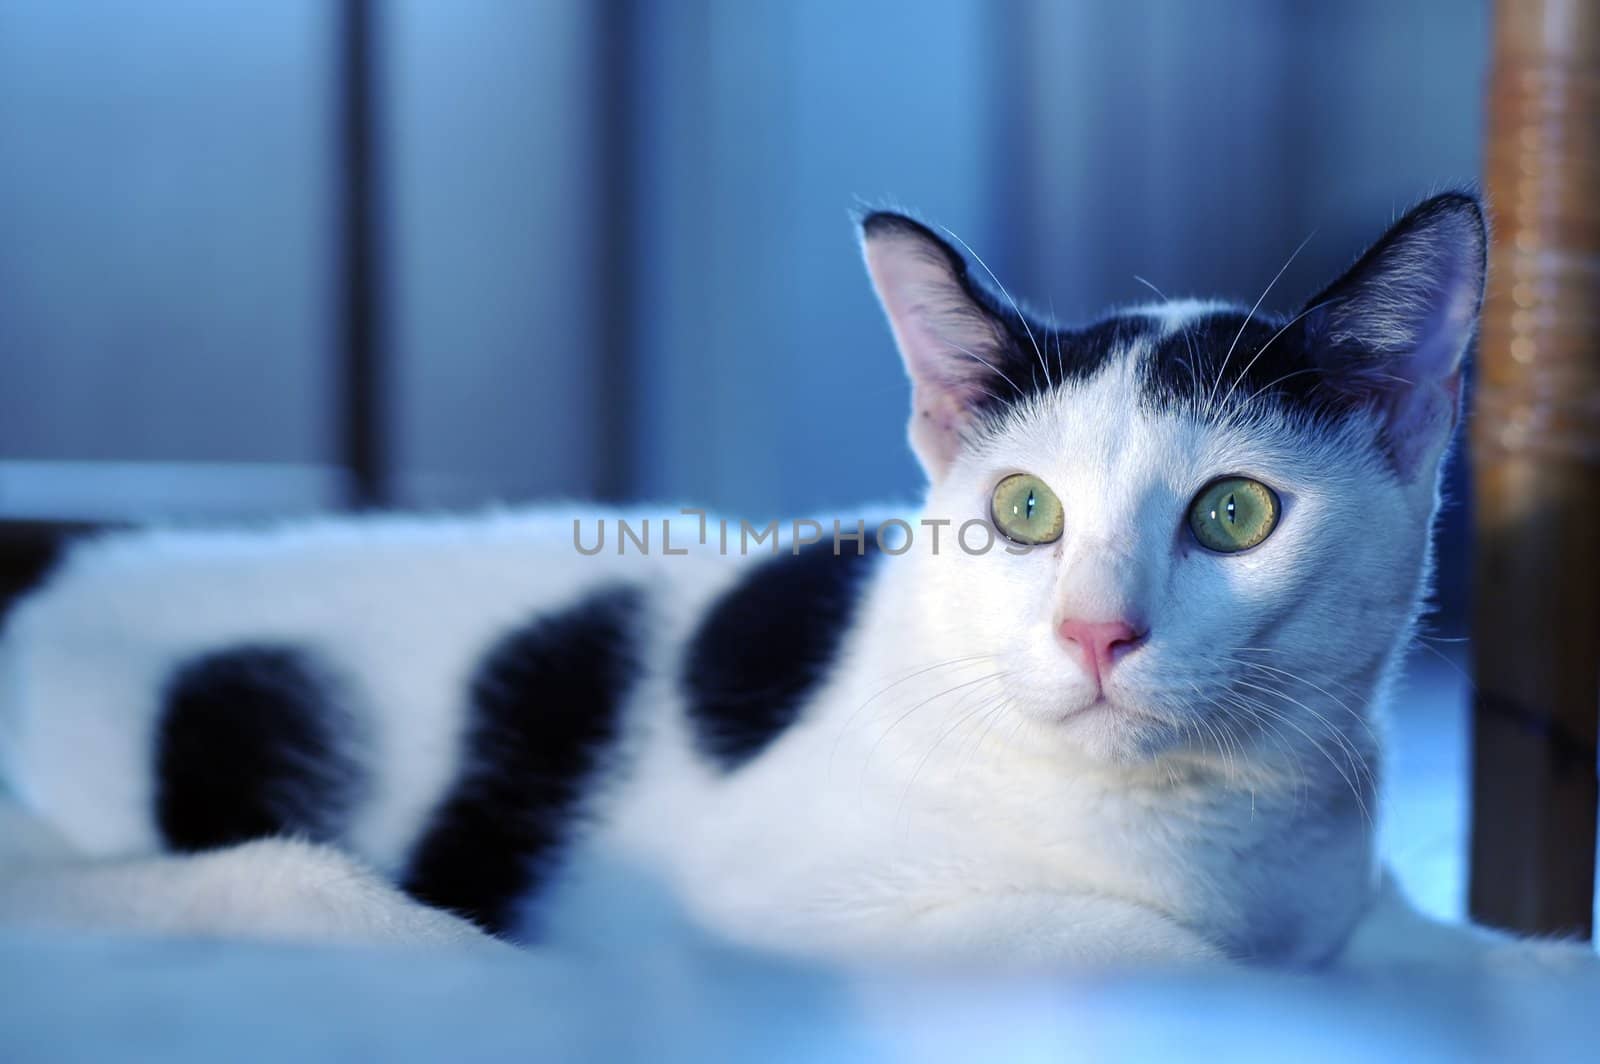 A very alert cat staring on something, shallow focus on eye.